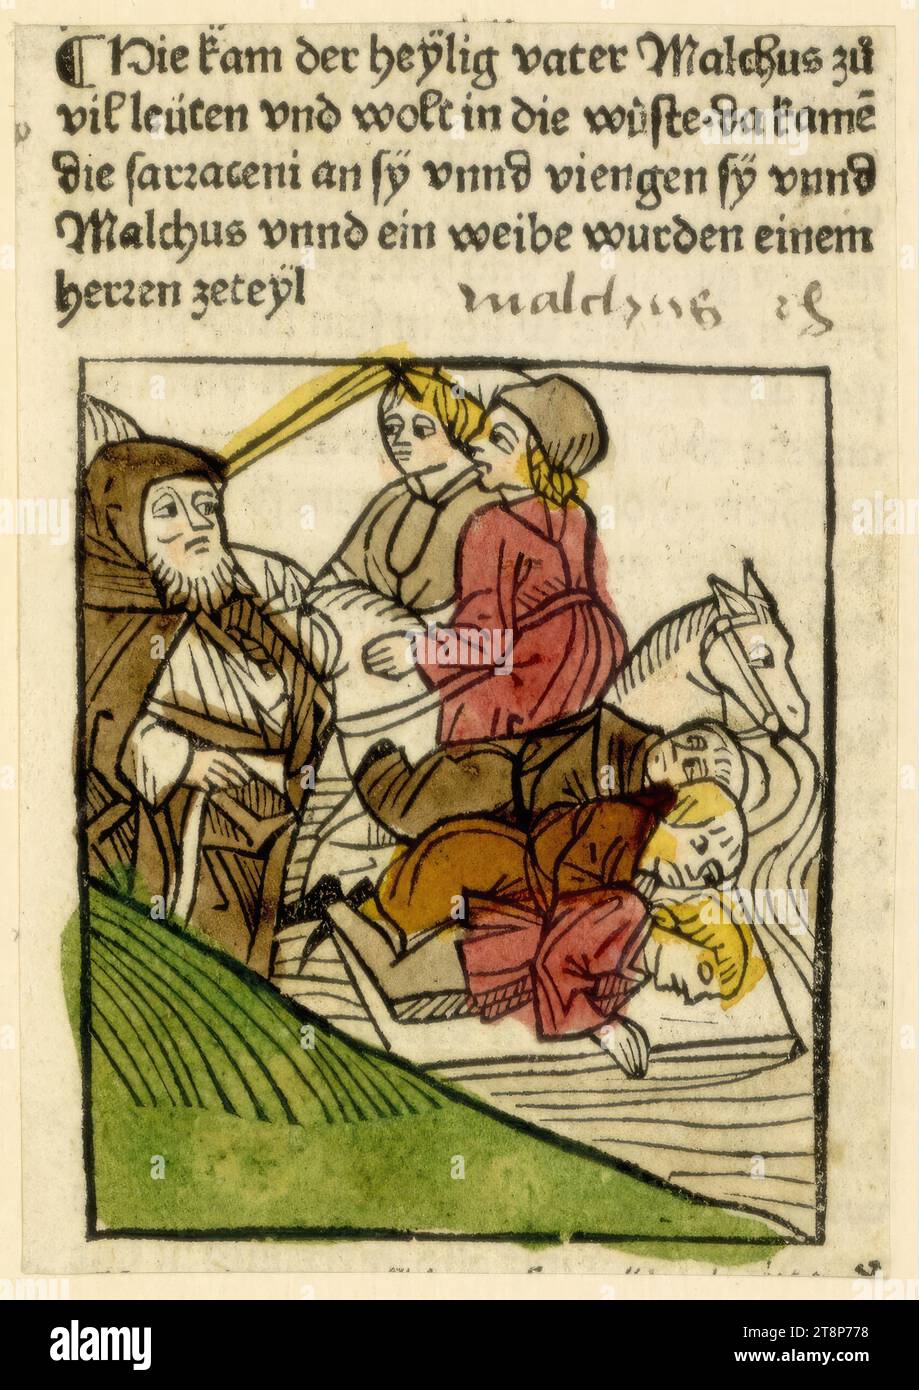 Father Malchus and the Saracens, illustration to 'Life of the Holy Elders' by Sophronius Eusebius Hieronymus, Augsburg, Peter Berger edition, May 21, 1488, Peter Berger (active 1486 - 1489 in Augsburg), 1488, printmaking, woodcut, colored, sheet : 10.4 x 7.4 cm Stock Photo